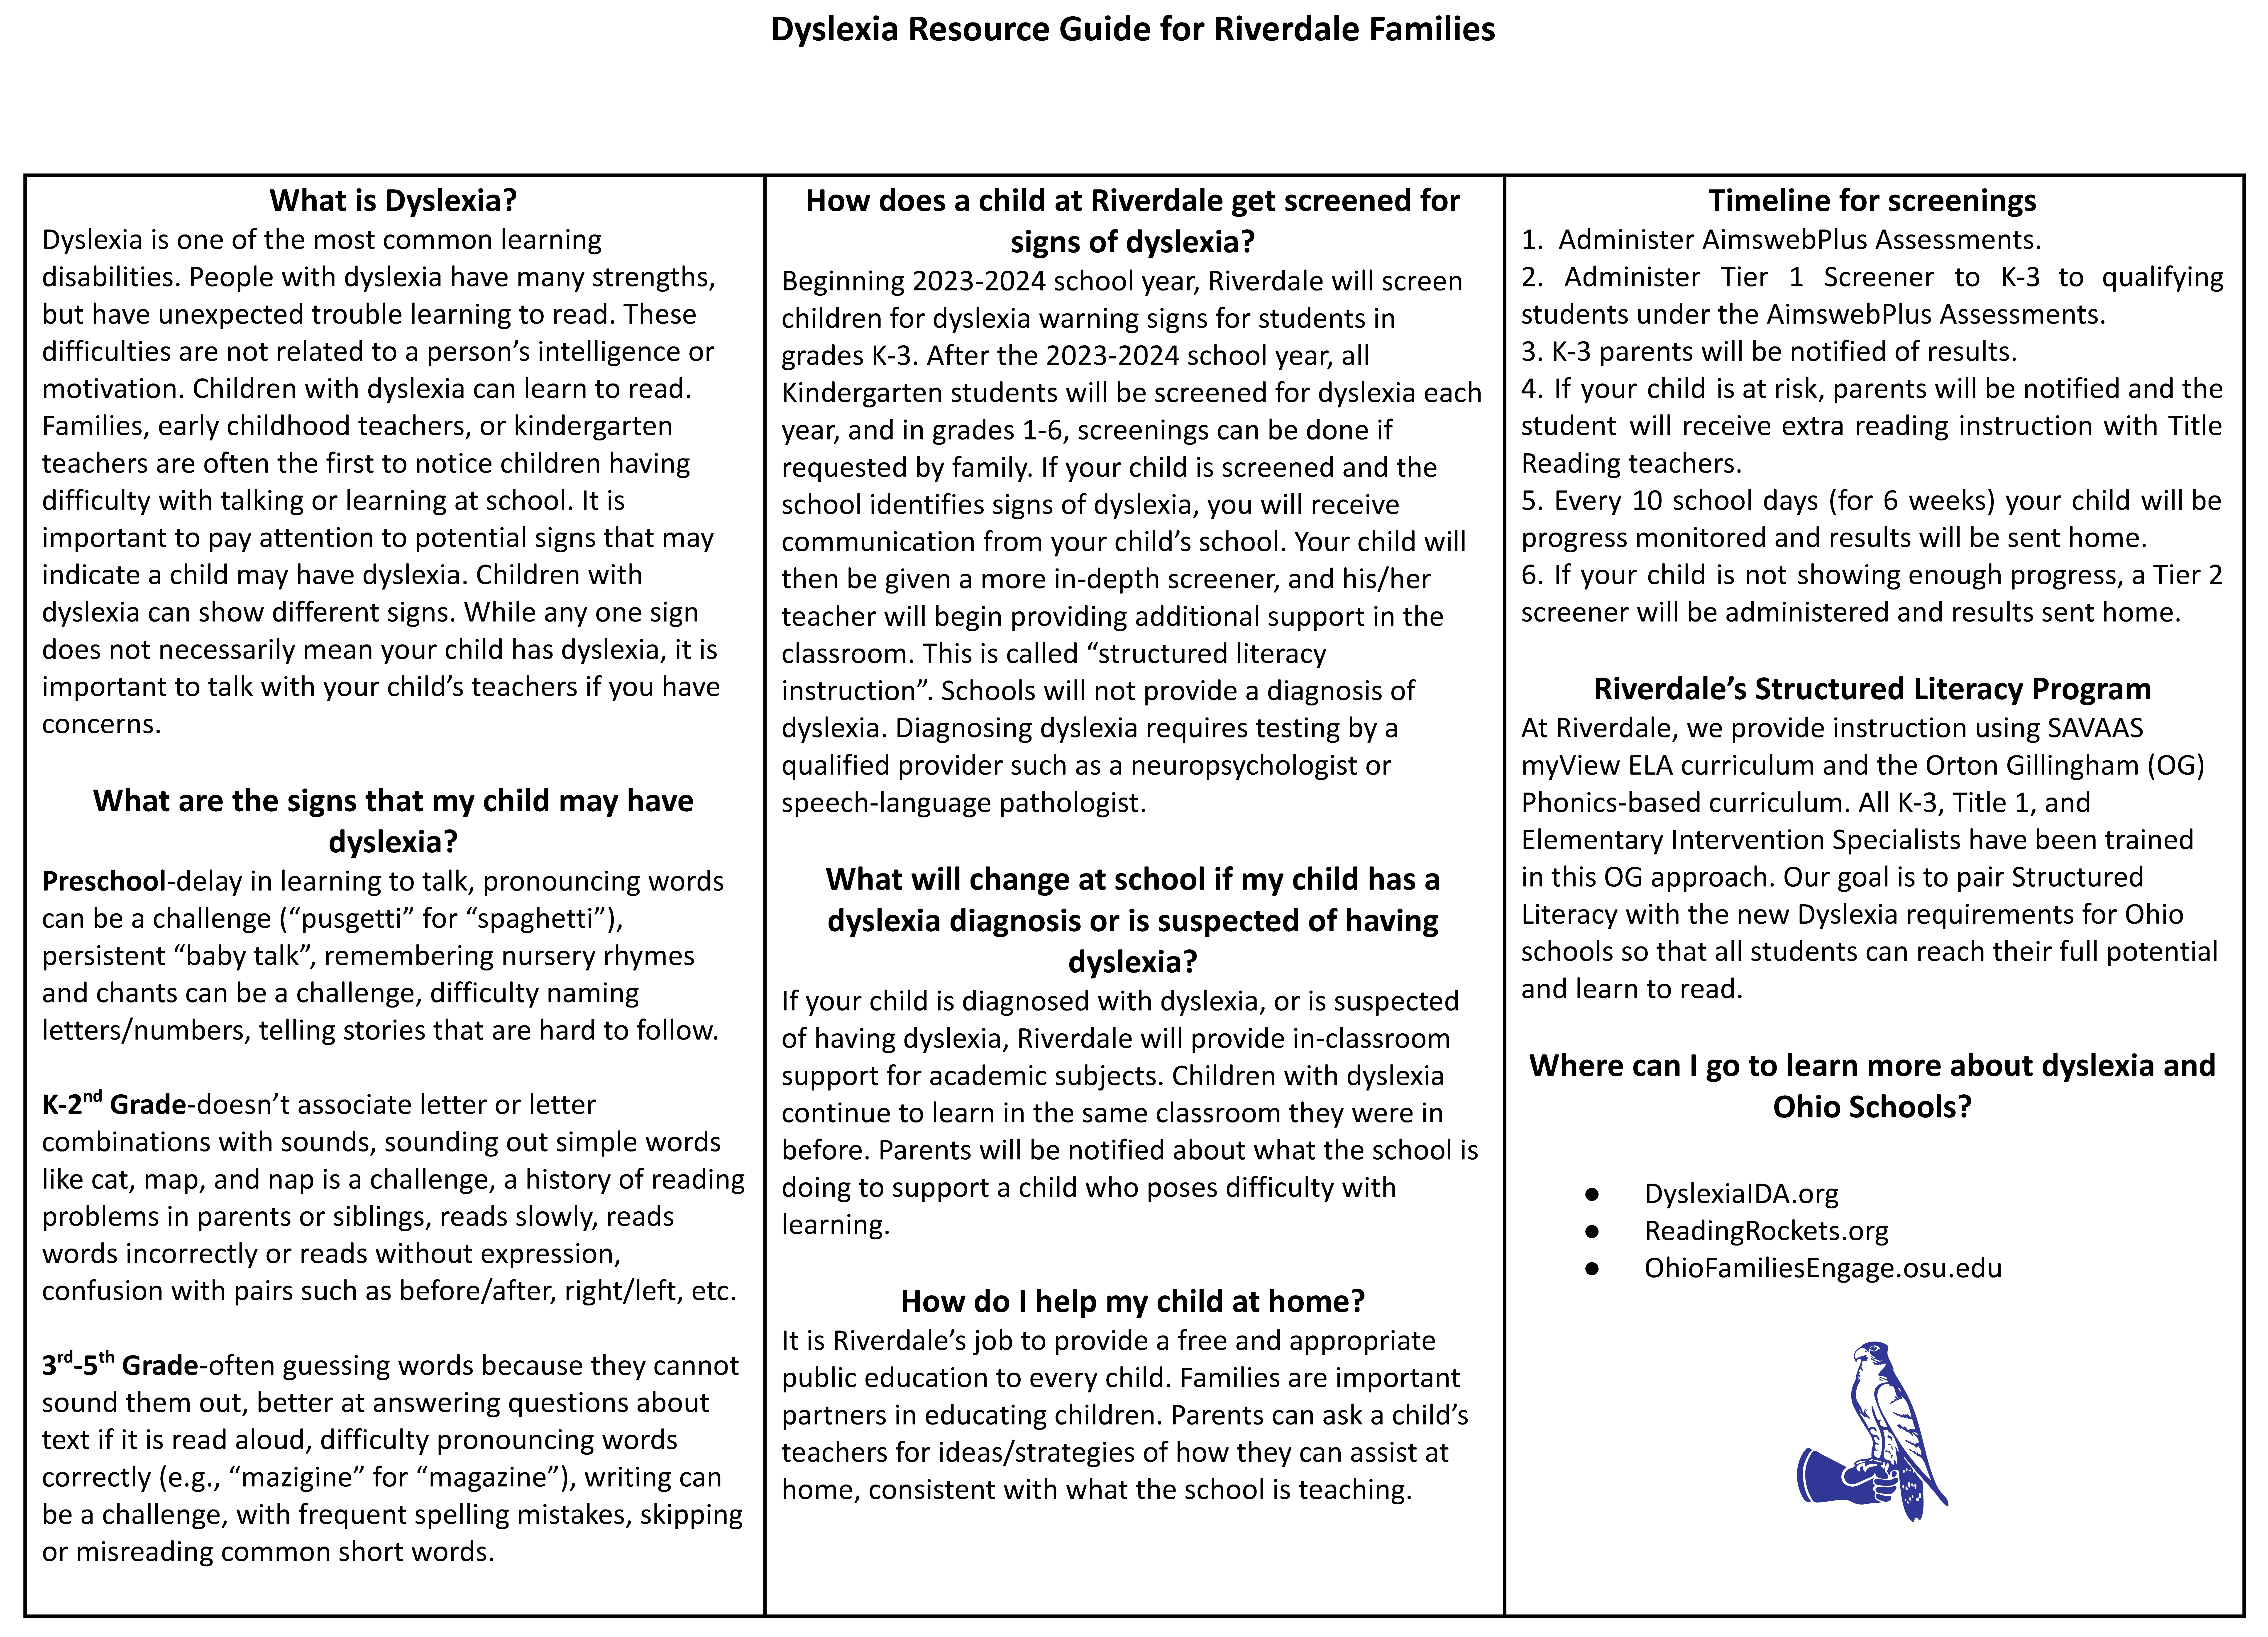 Dyslexia Resource Guide for Riverdale Families